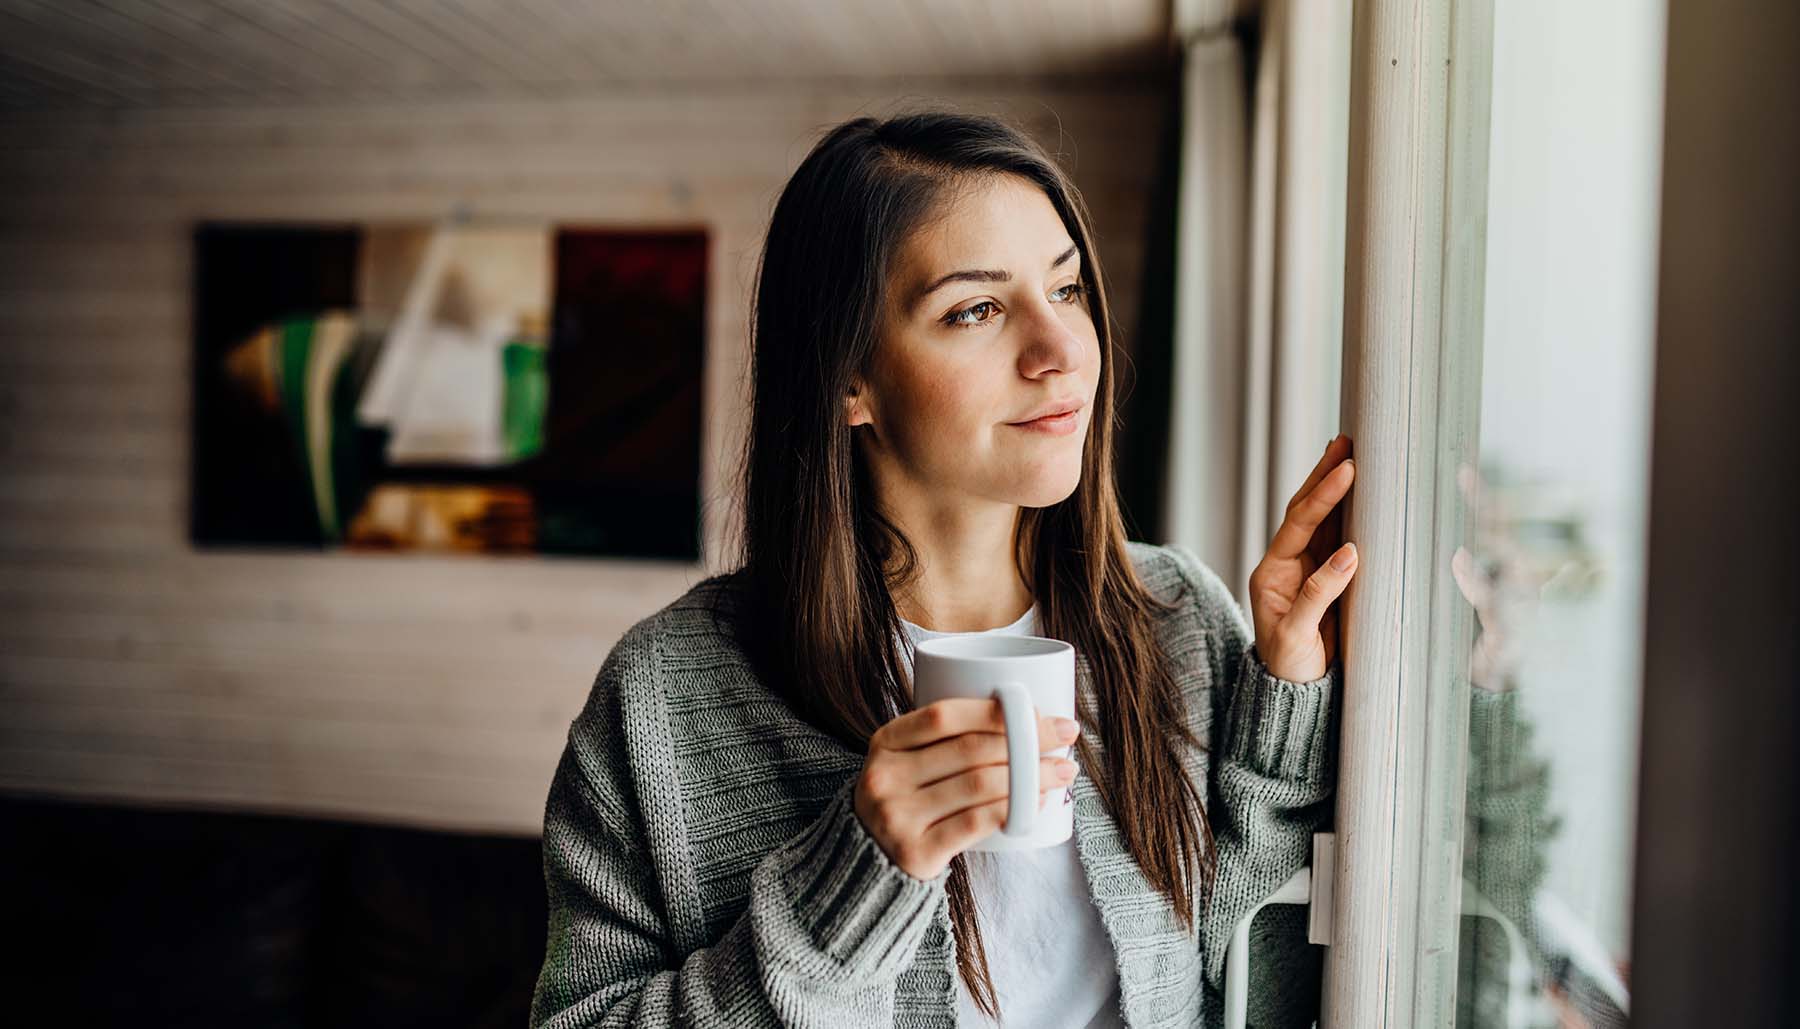 Young woman spending free time home looking out the window